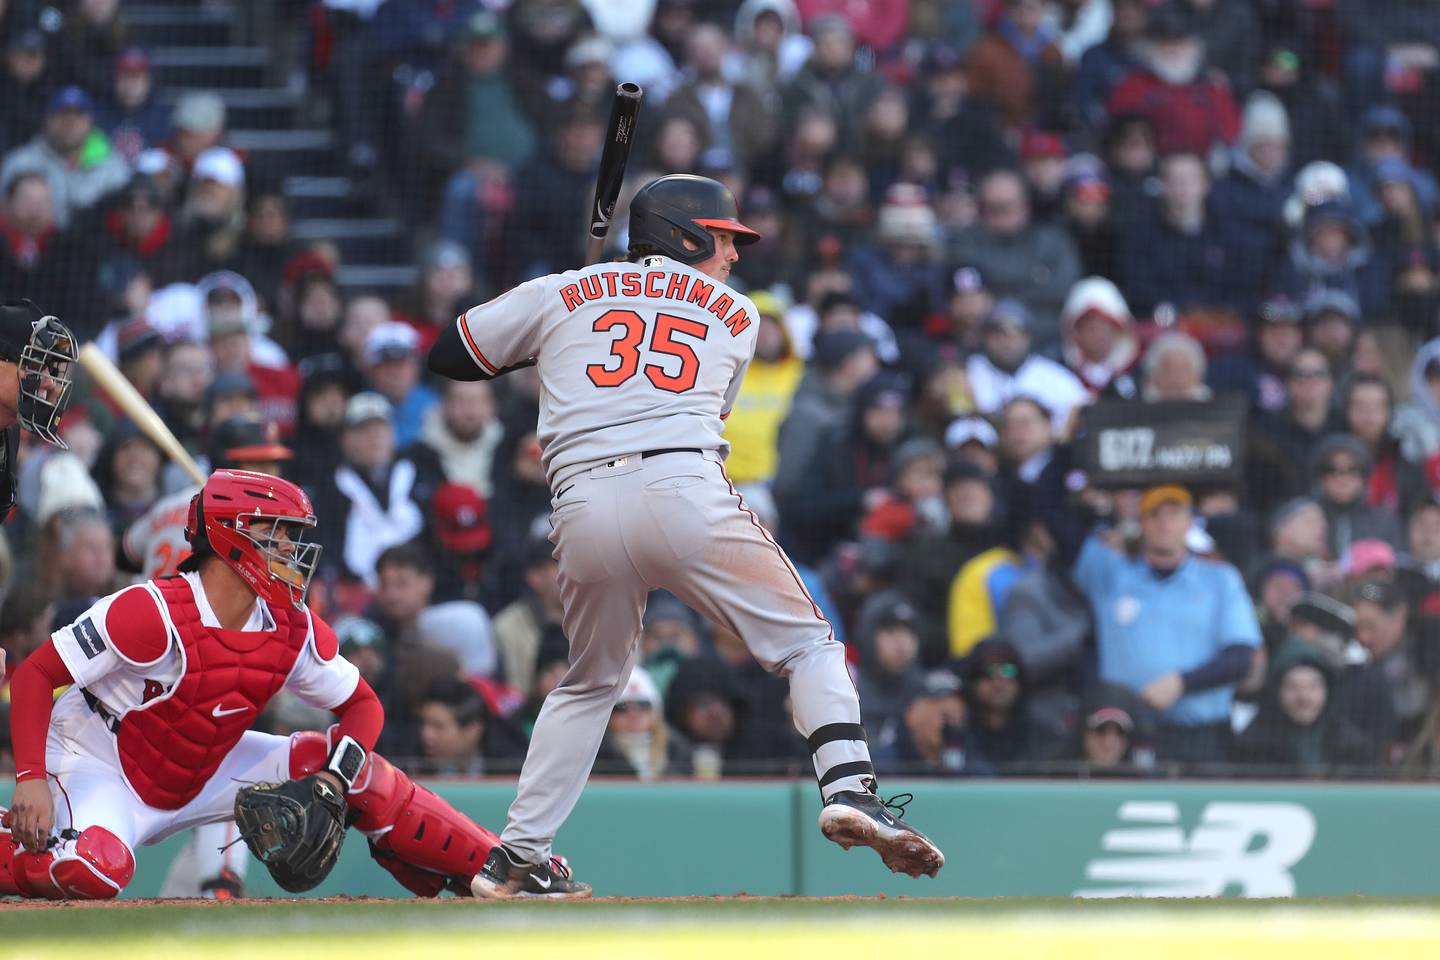 BOSTON, MASSACHUSETTS - MARCH 30: Adley Rutschman #35 of the Baltimore Orioles bats during the fifth inning against the Boston Red Sox on Opening Day at Fenway Park on March 30, 2023 in Boston, Massachusetts.